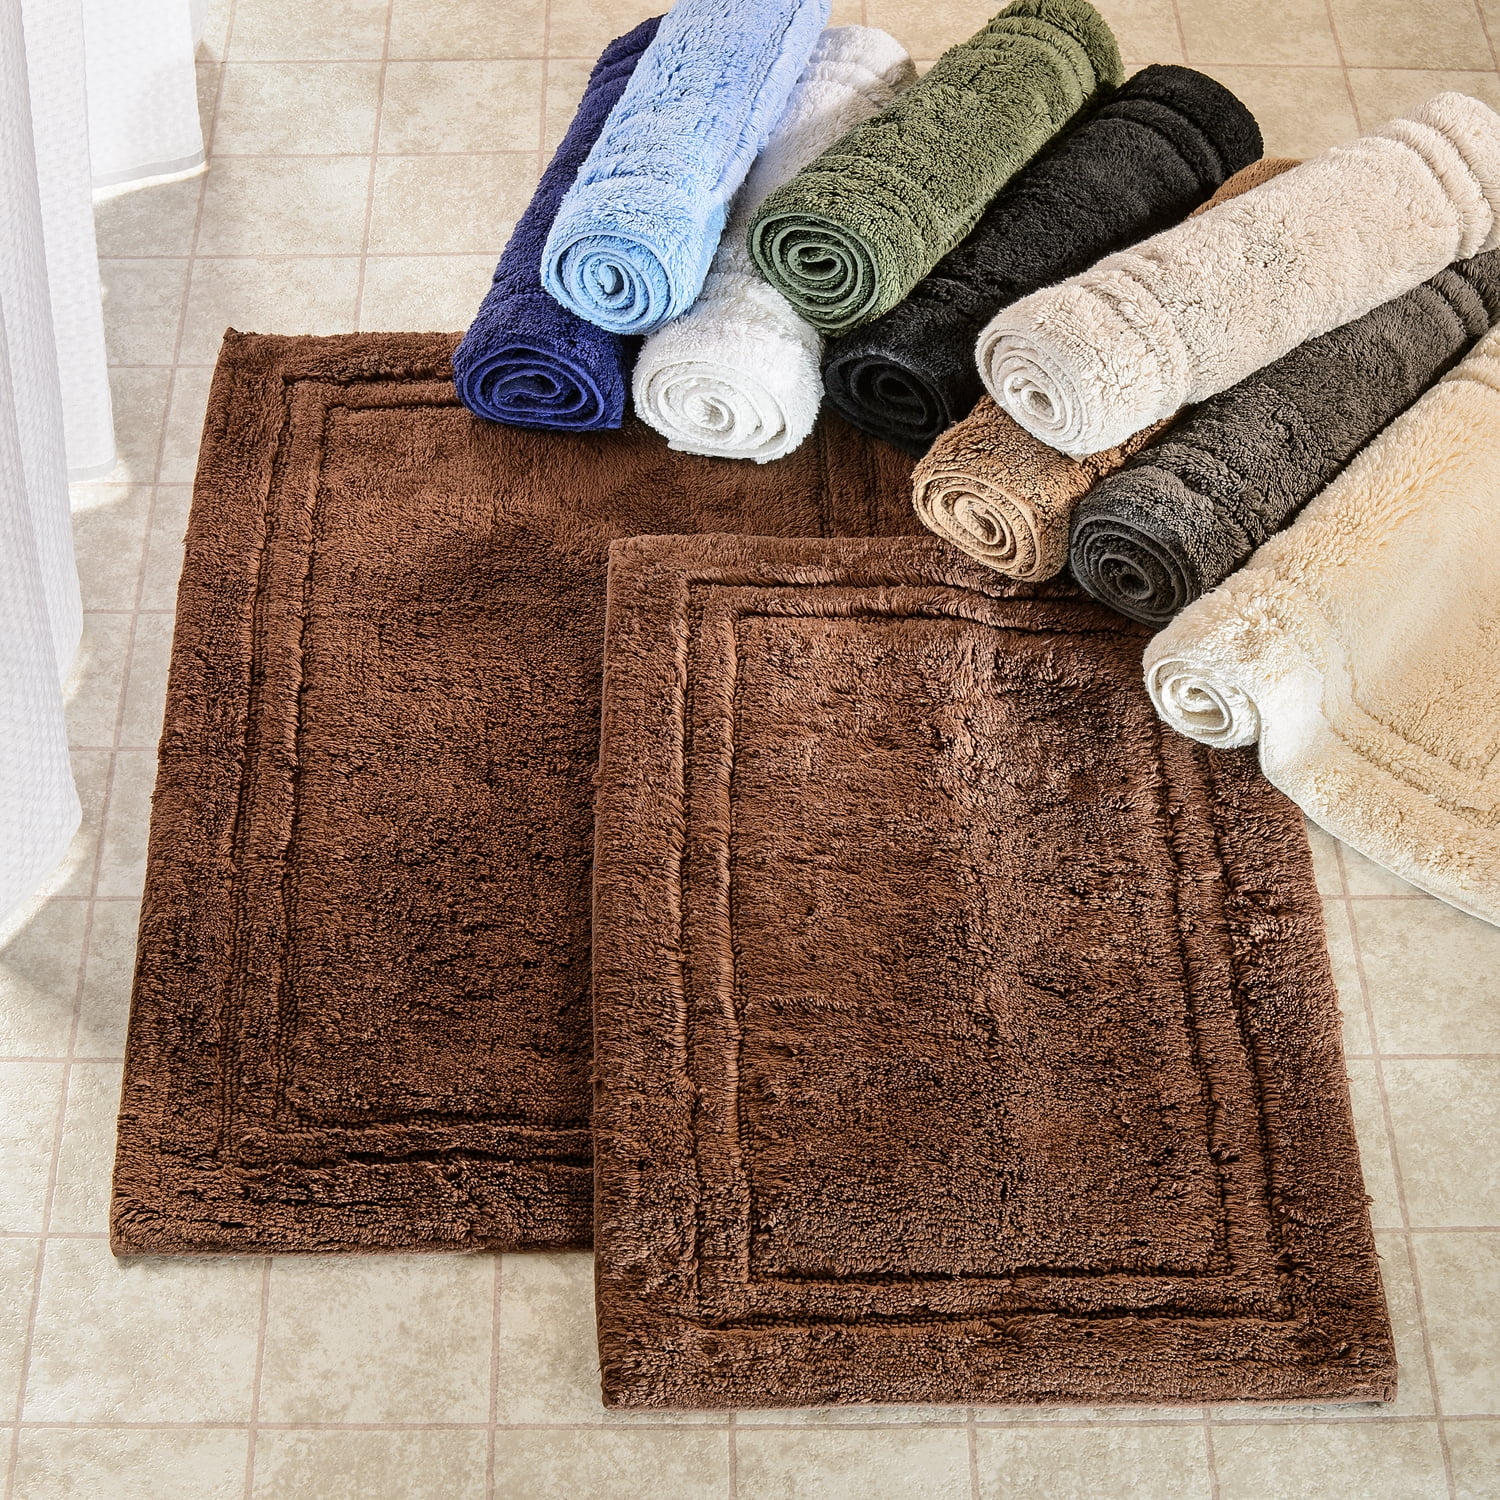 Bathroom Rug Set- 2-Piece Memory Foam Bath Mats-Wavy Microfiber  Top-Non-Slip Absorbent Runner for Shower, Tub, Sink, or Kitchen by Somerset  Home (Taupe) 